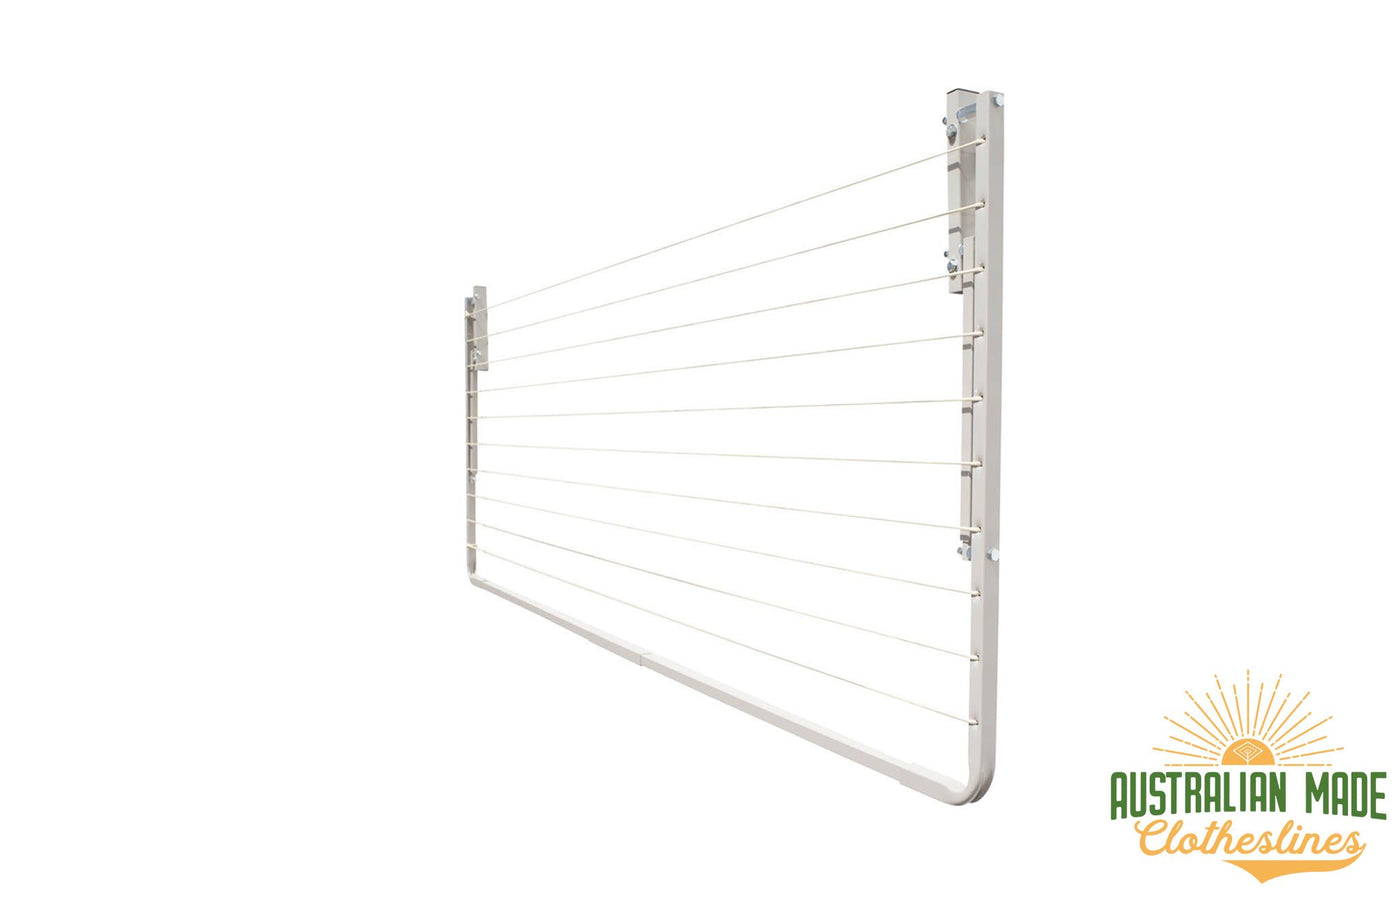 Eco 240 Clothesline - Right Side Perspective Folded Down - Australian Made Clotheslines